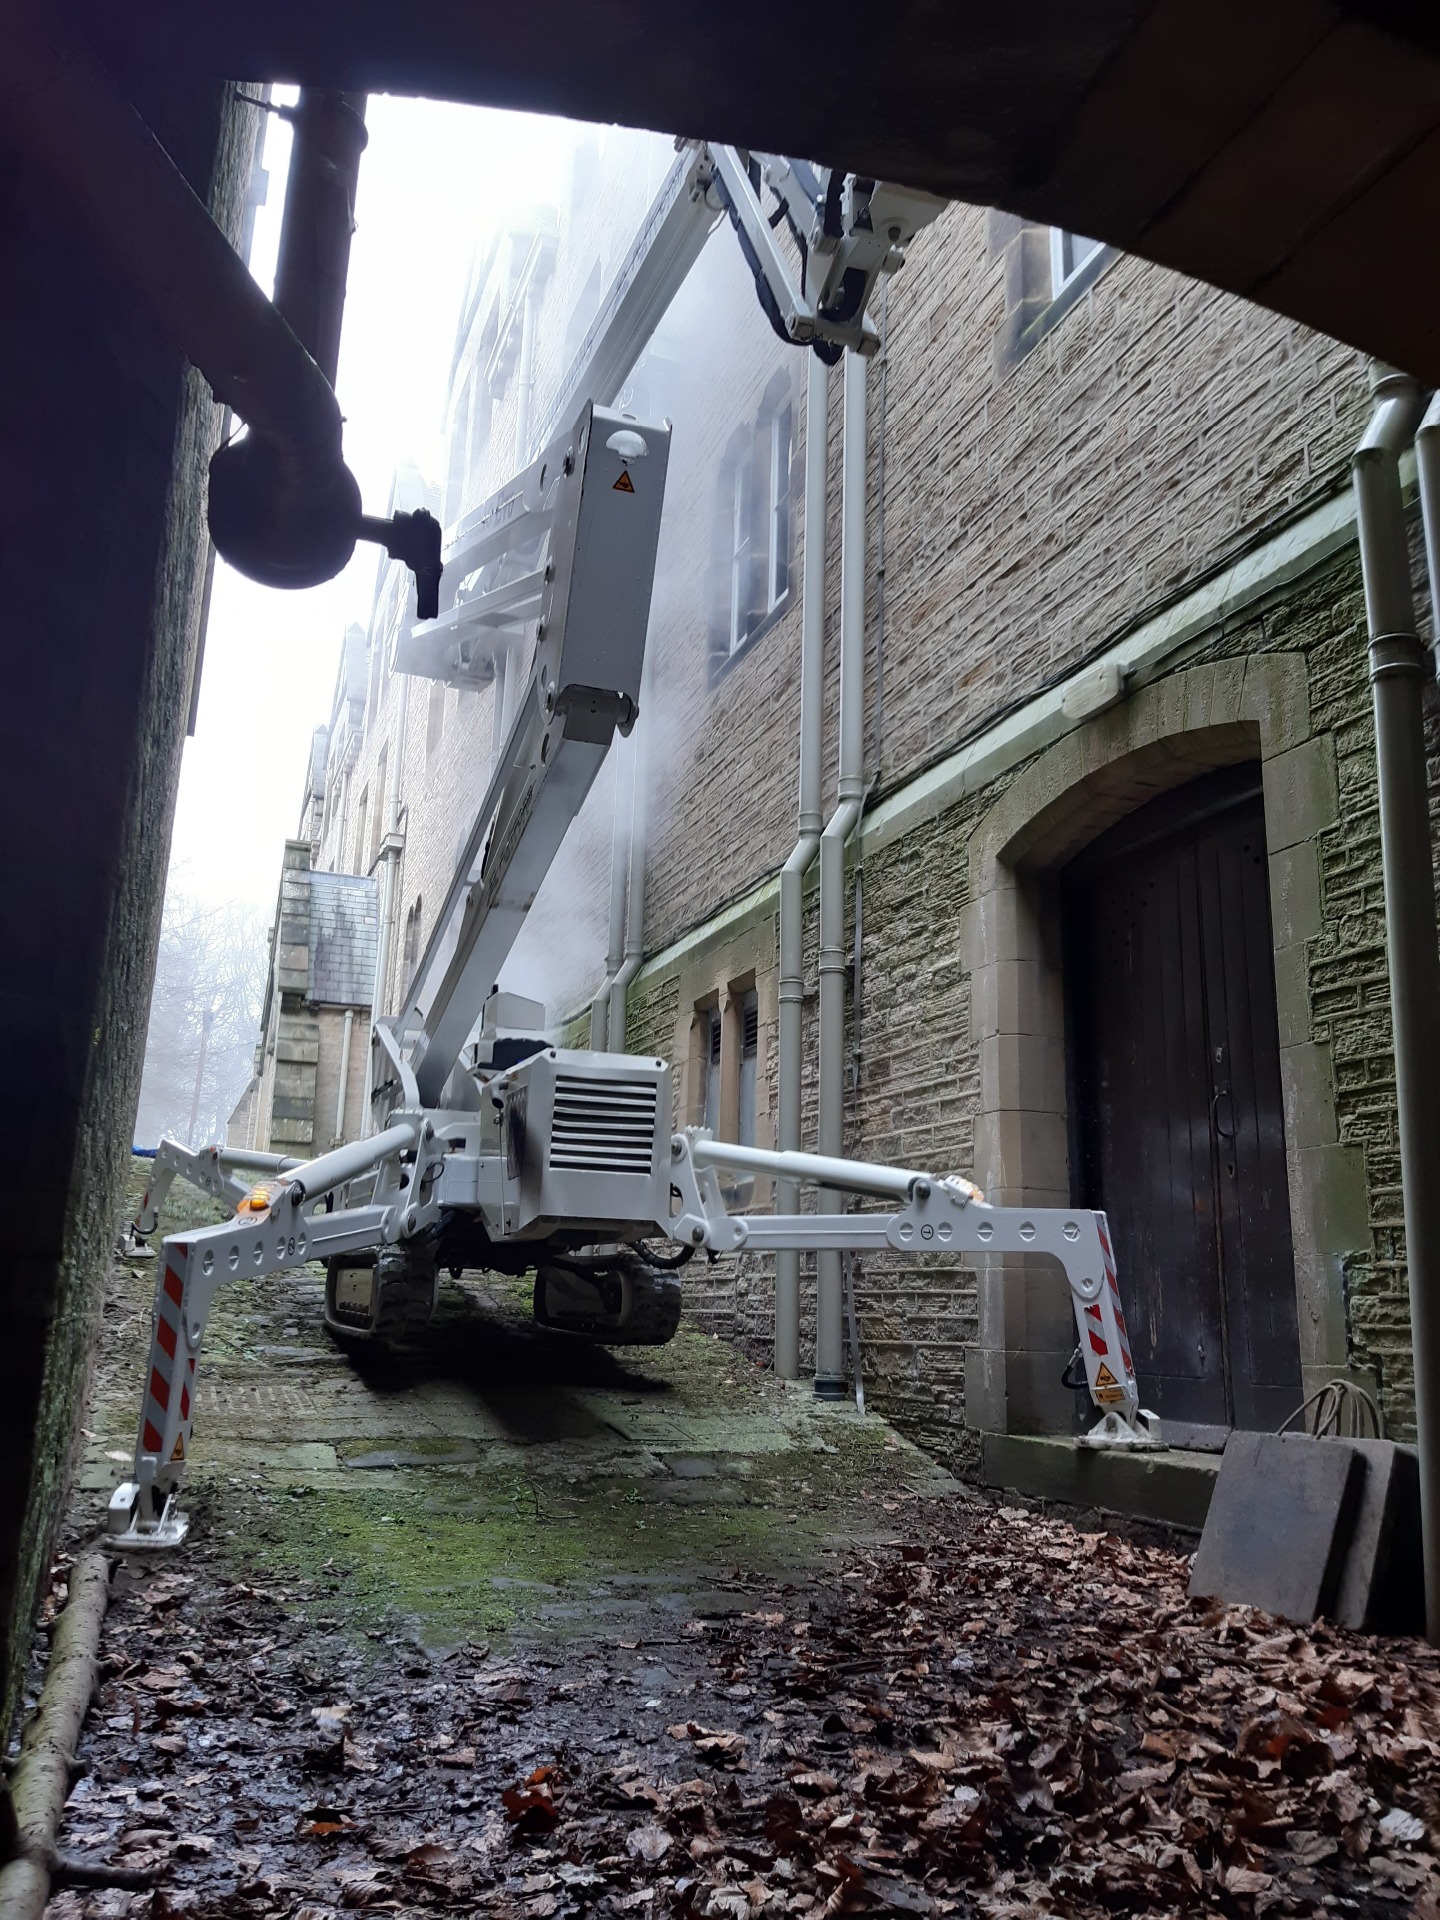 Tracked spider cherry picker in steep sloping stone cobbled alley.